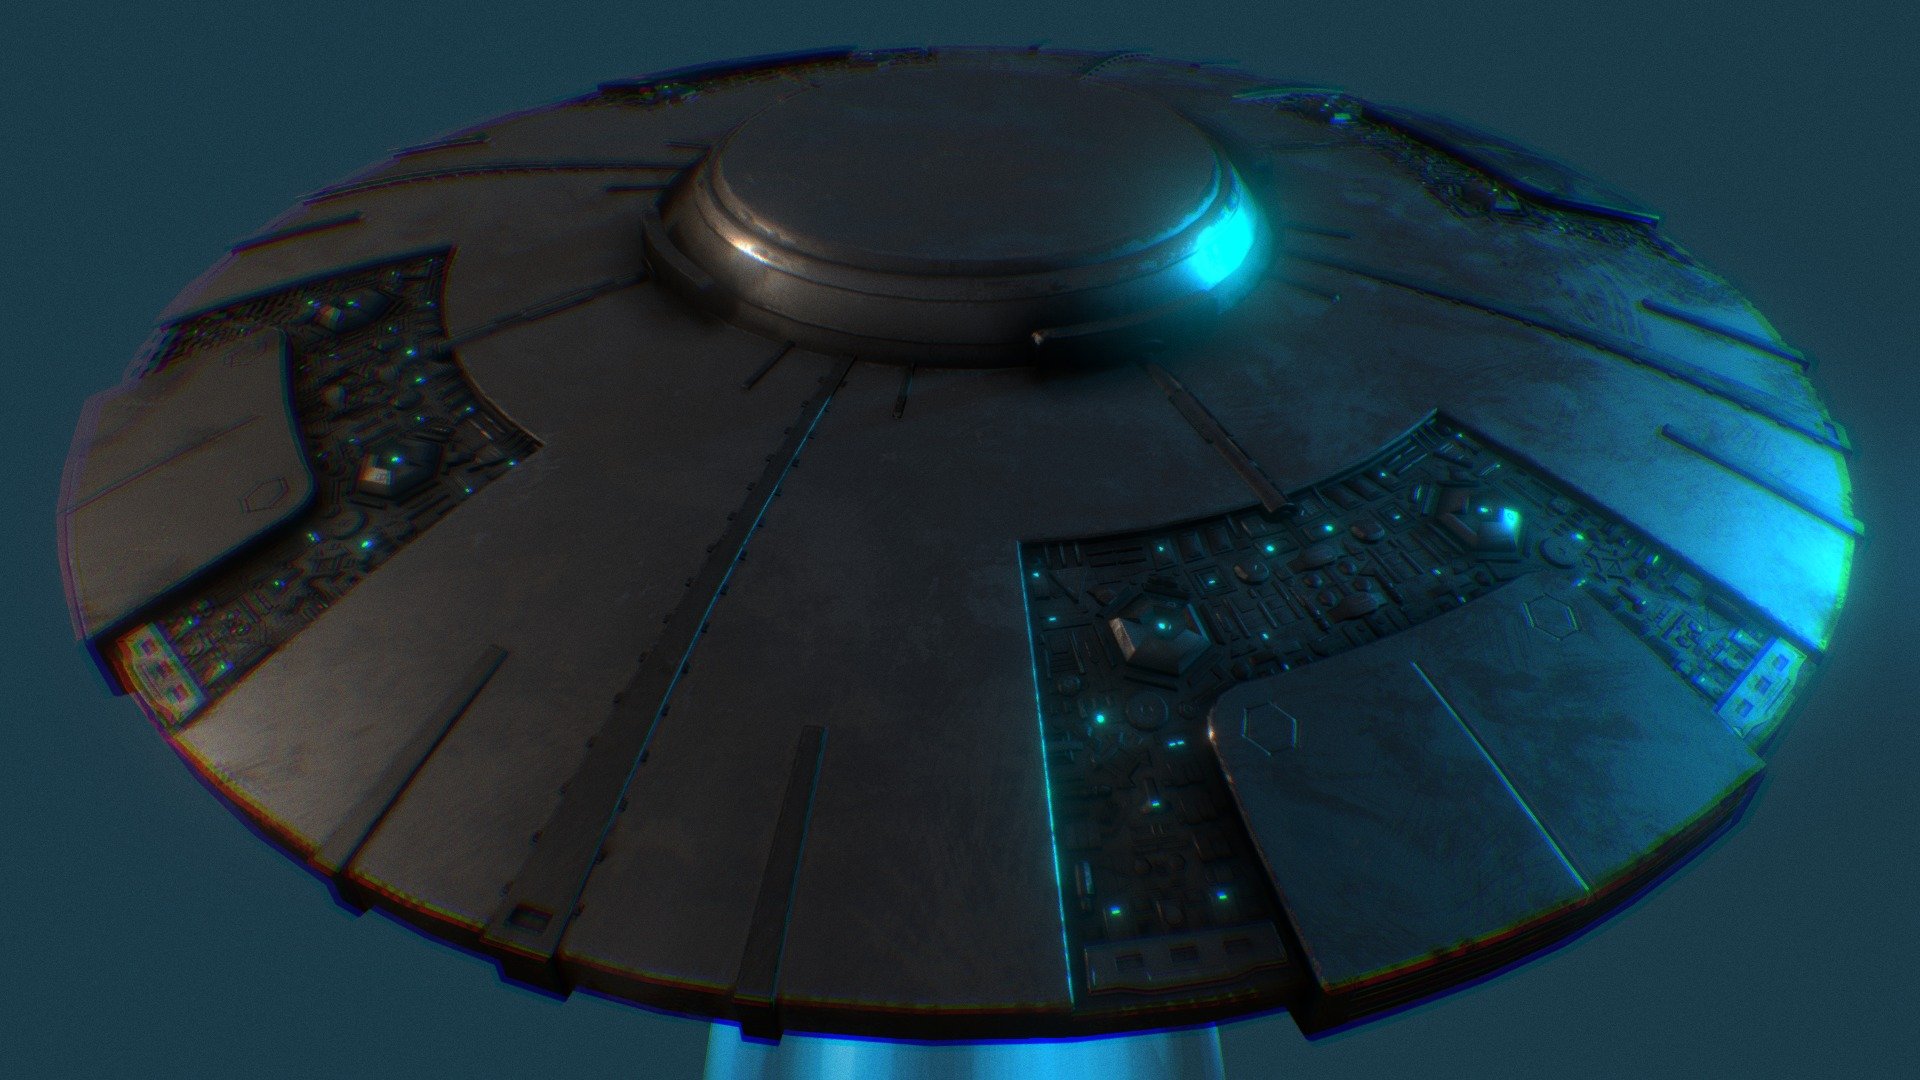 My idea of a flying saucer. Modeled on blender and textured on substance painter.
Basic animation with light effects.

Click follow to see more about my works 3d model